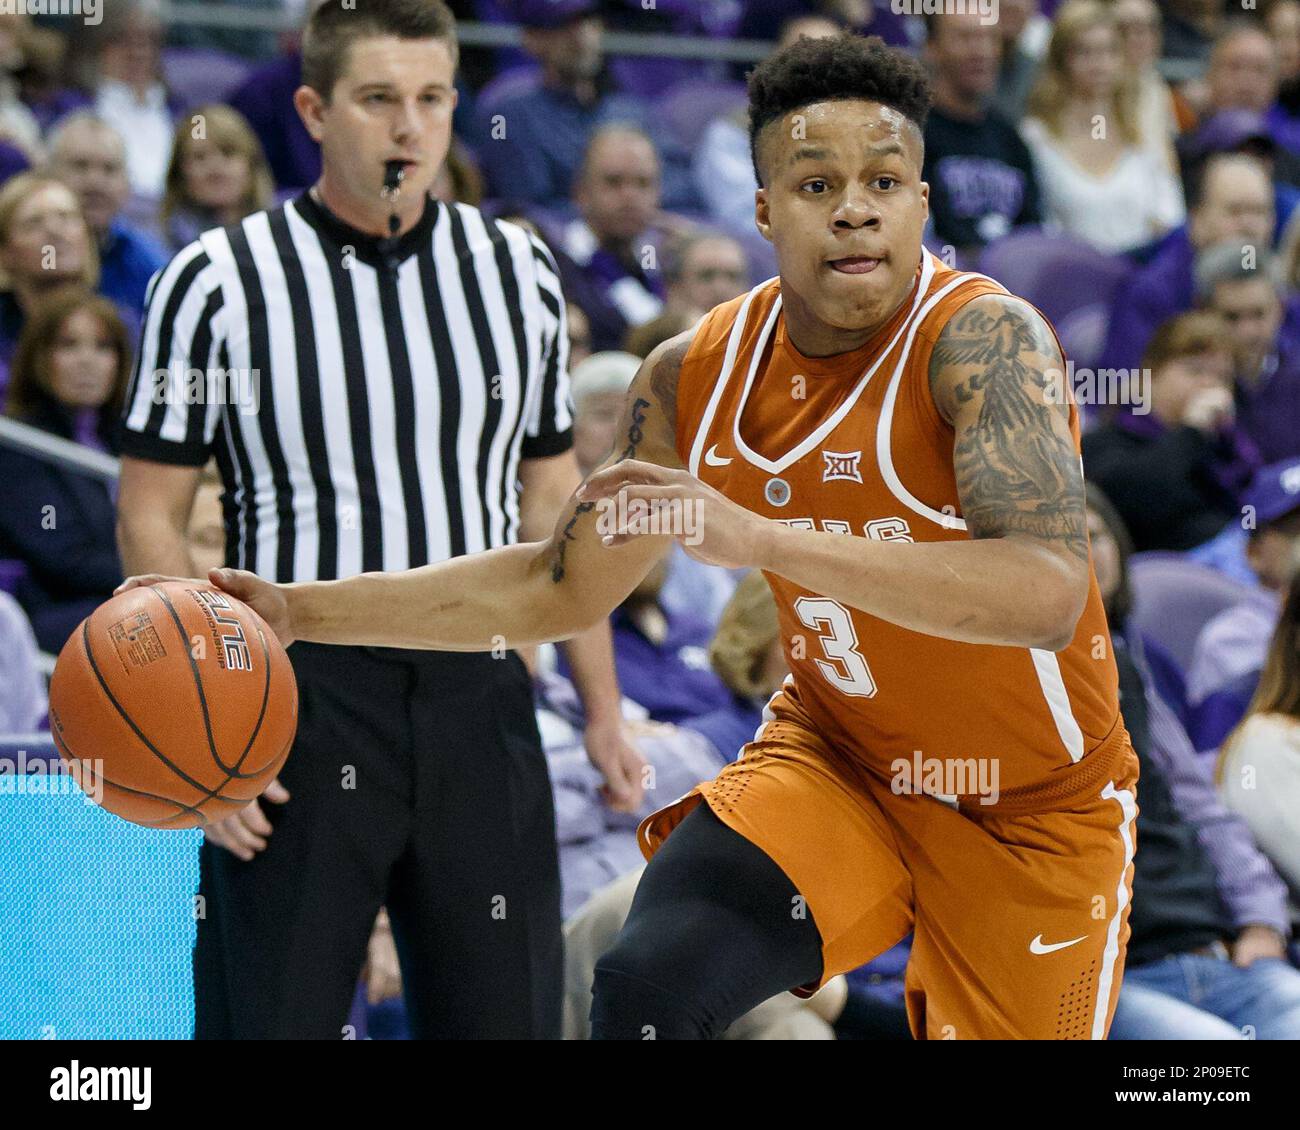 FORT WORTH, TX - FEBRUARY 04: Texas Longhorns forward Jarrett Allen (#31)  shoots a free throw during the Big 12 college basketball game between the  TCU Horned Frogs and the Texas Longhorns